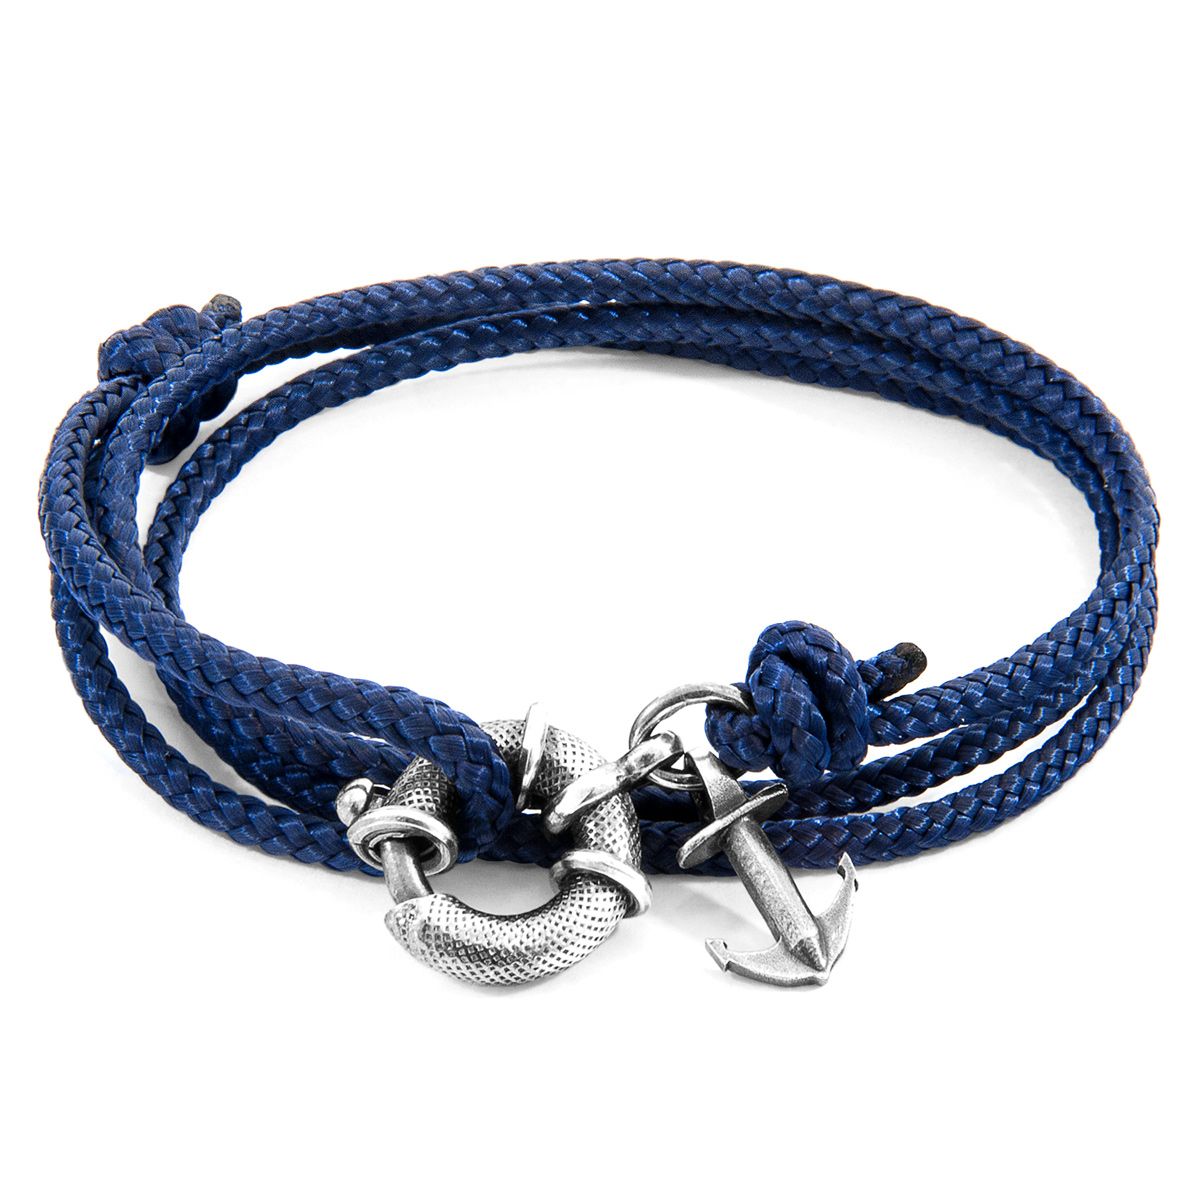 The Navy Blue Clyde Anchor Silver and Rope Bracelet was both designed and skilfully handcrafted completely in Great Britain, In Quality We Trust. For the Modern Journeyman (and woman), ANCHOR & CREW takes ownership of an exploratory lifestyle and enjoys the Happy-Good Life. Combining British craft manufacturing with a discerning modern-minimalist style, this ANCHOR & CREW bracelet features:

3mm diameter performance Marine Grade polyester and nylon rope (GB) 
Secure solid .925 sterling silver lifeboat clasp and drop anchor (GB)  

SIZING
This bracelet is one size fits all, with the rope able to extend or tighten to suit your wrist size. To take the bracelet on or off your wrist, simply slide the one adjustable knot around the rope to make the loop size smaller or larger. Once set, keep the loop size consistent and simply slide the latch within the clasp and feed the rope into or out of the toggle.